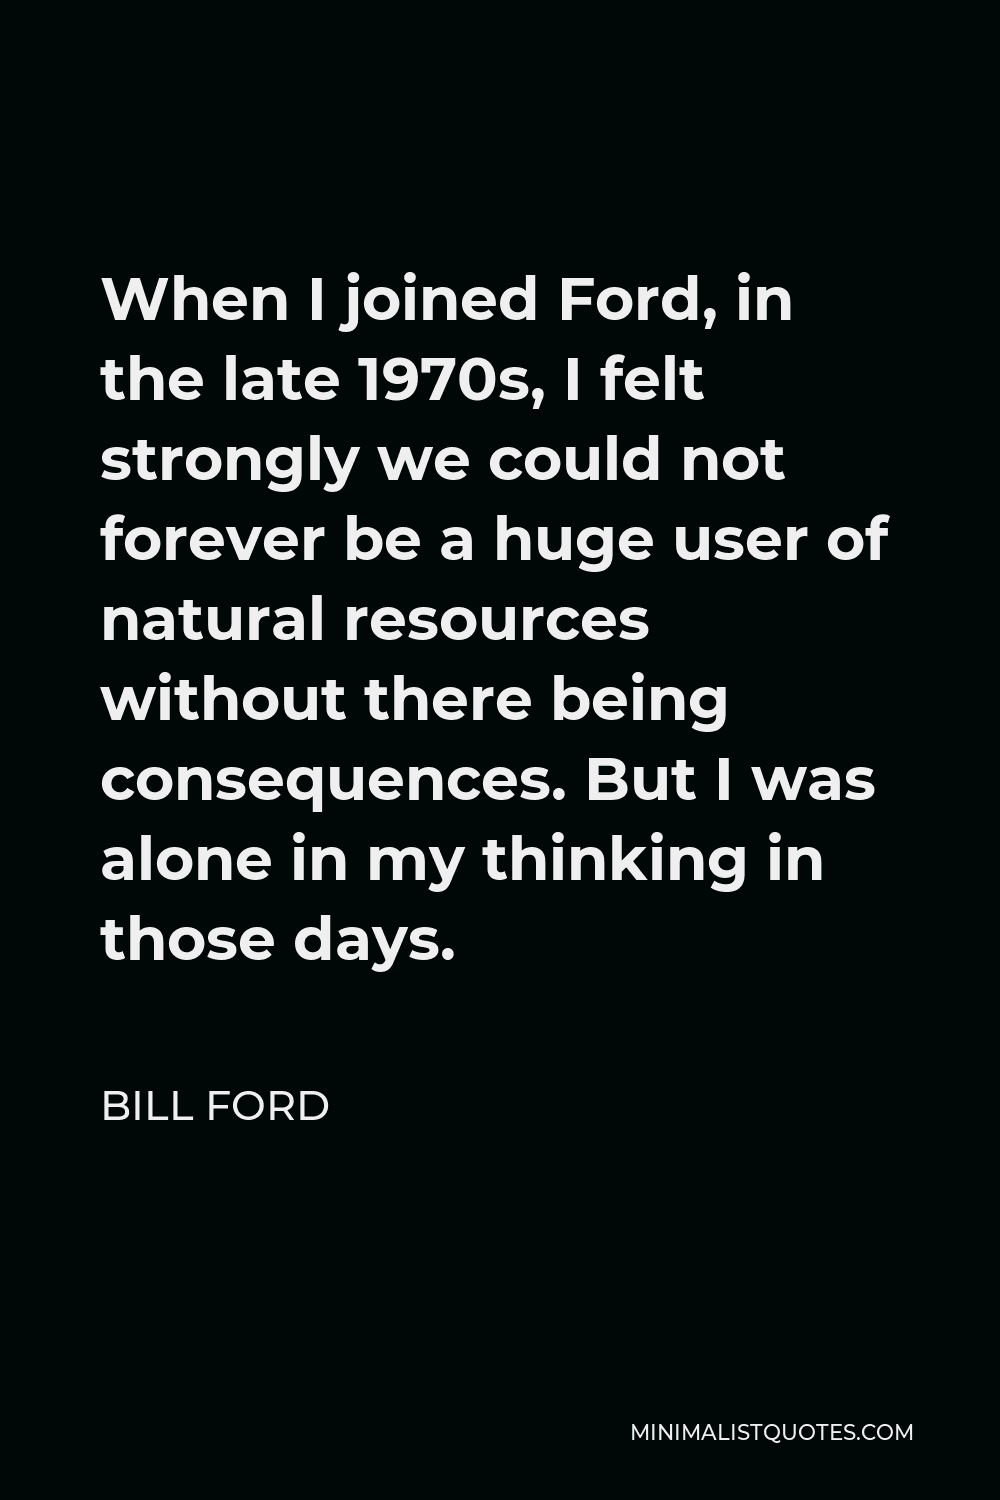 Bill Ford Quote - When I joined Ford, in the late 1970s, I felt strongly we could not forever be a huge user of natural resources without there being consequences. But I was alone in my thinking in those days.